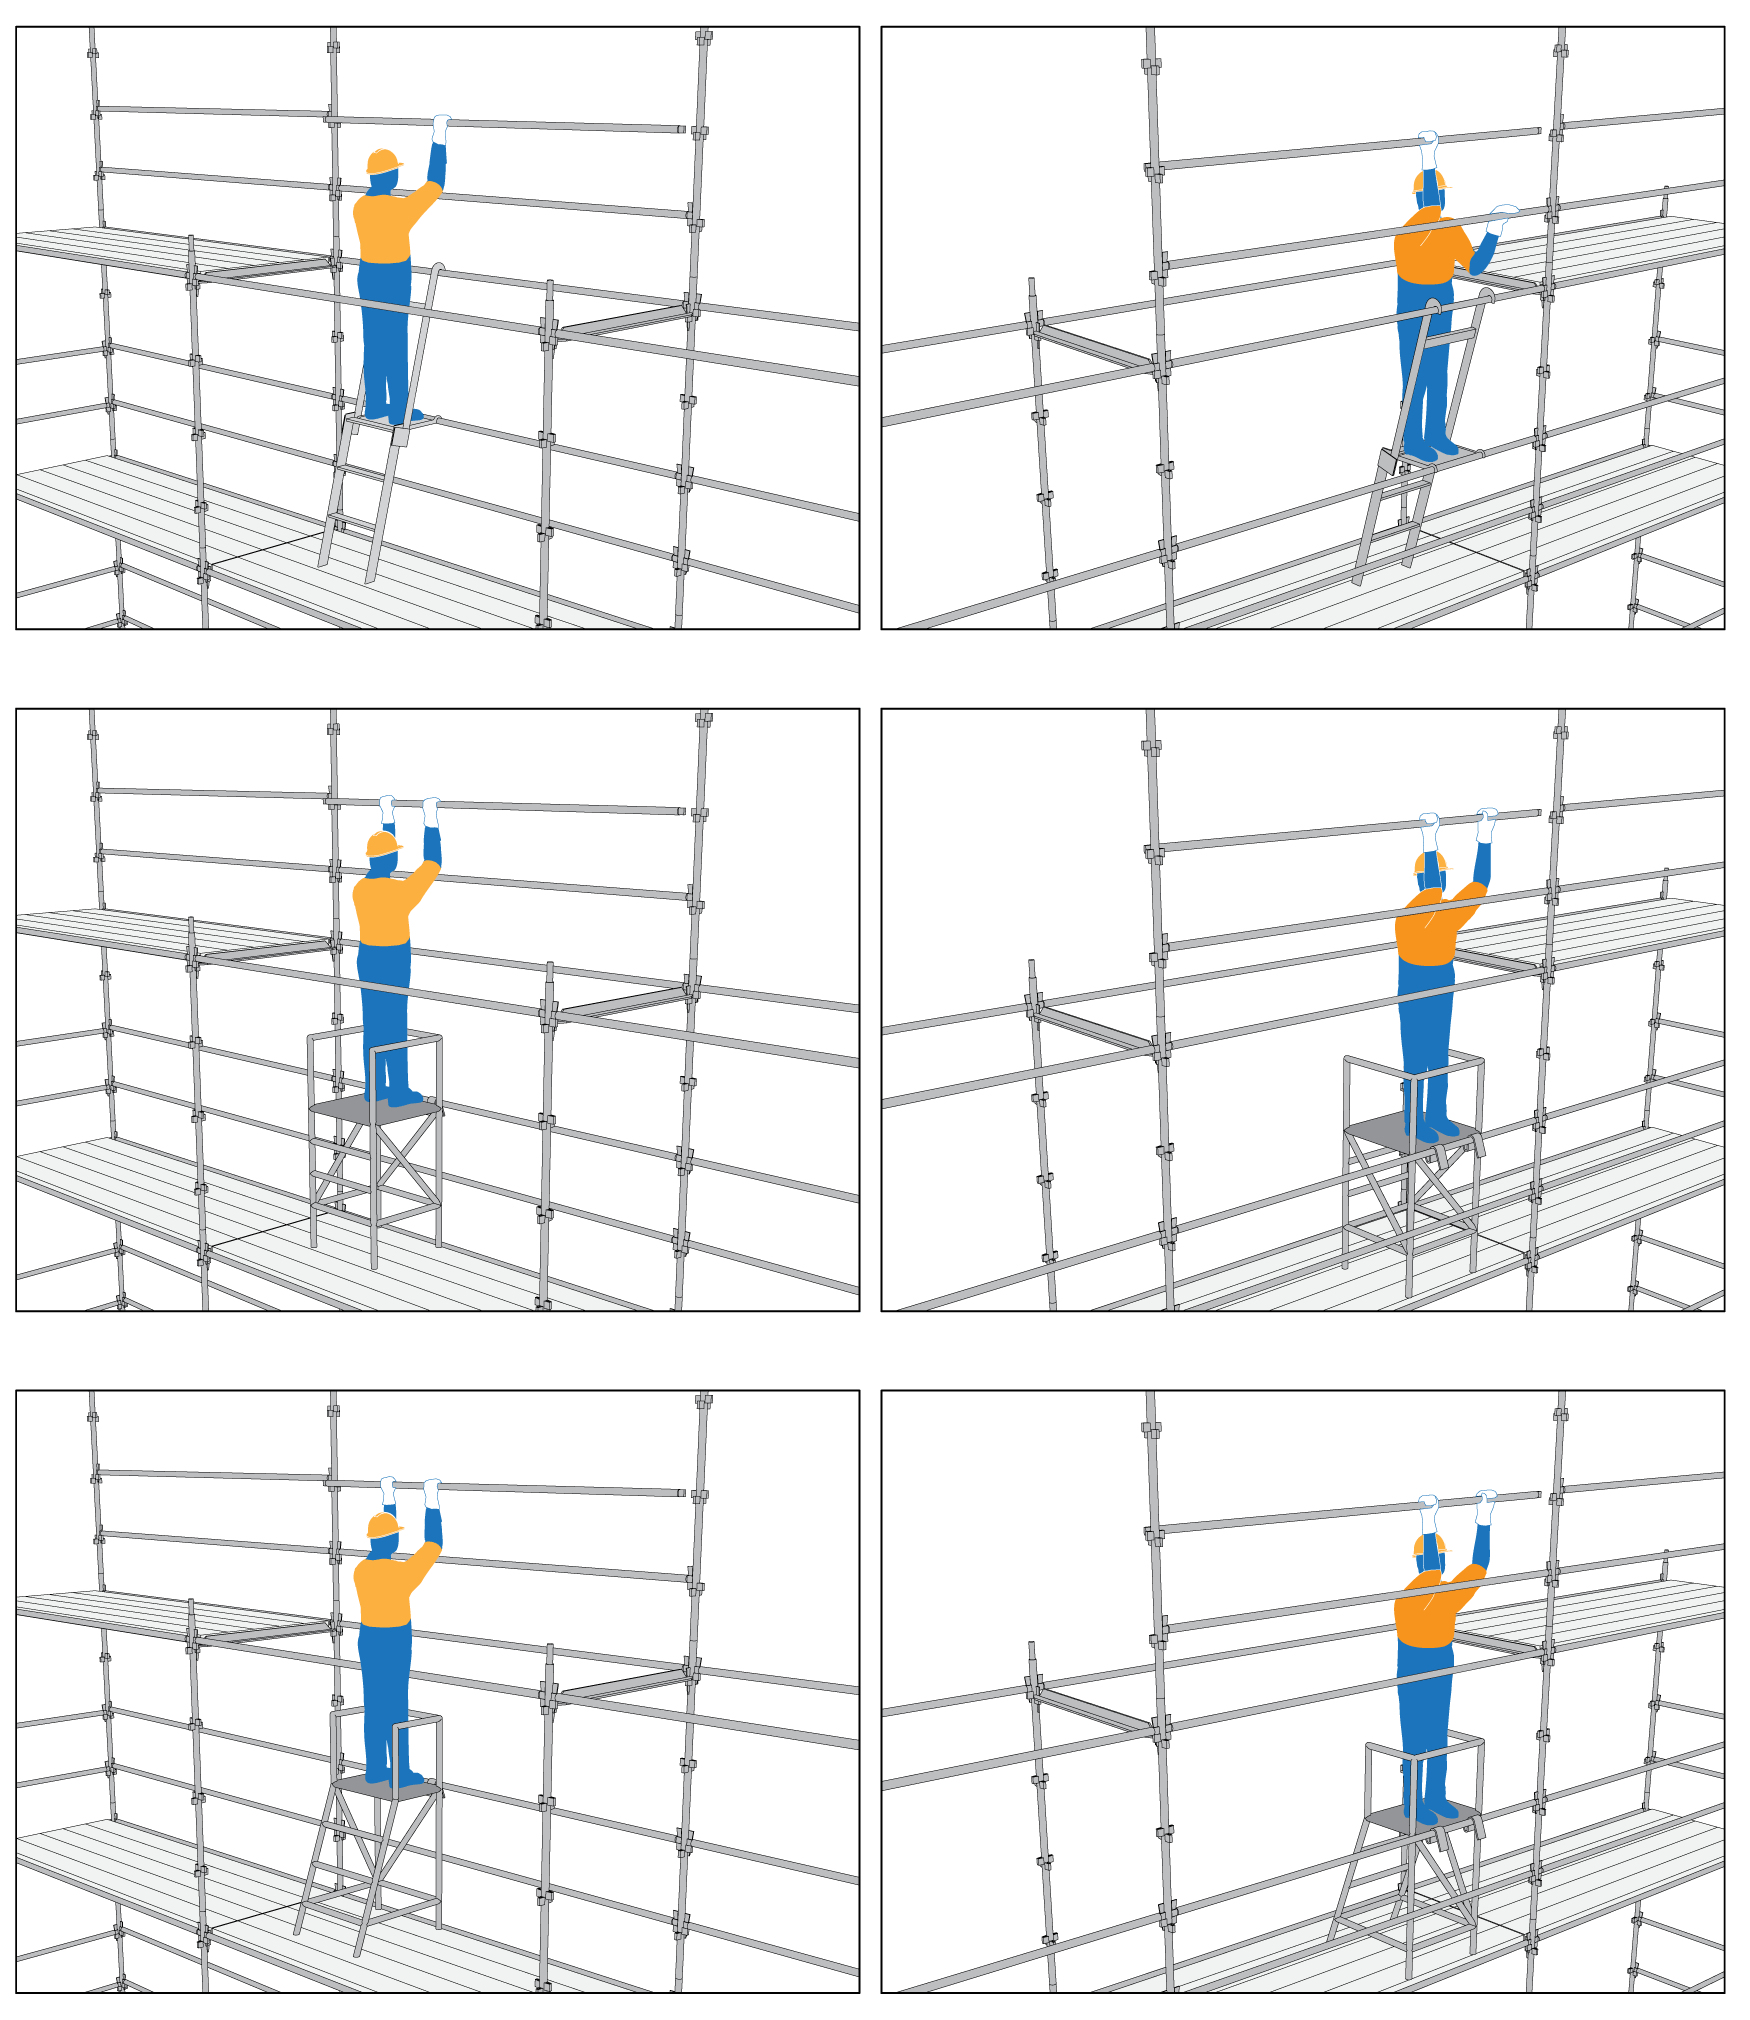 Figure 1: Diagrammatic illustration of erection and dismantling using various erection platform options – one-man operation. Note: scaffold is shown against a building, so guardrails only needed on external face. Toeboards omitted for clarity.